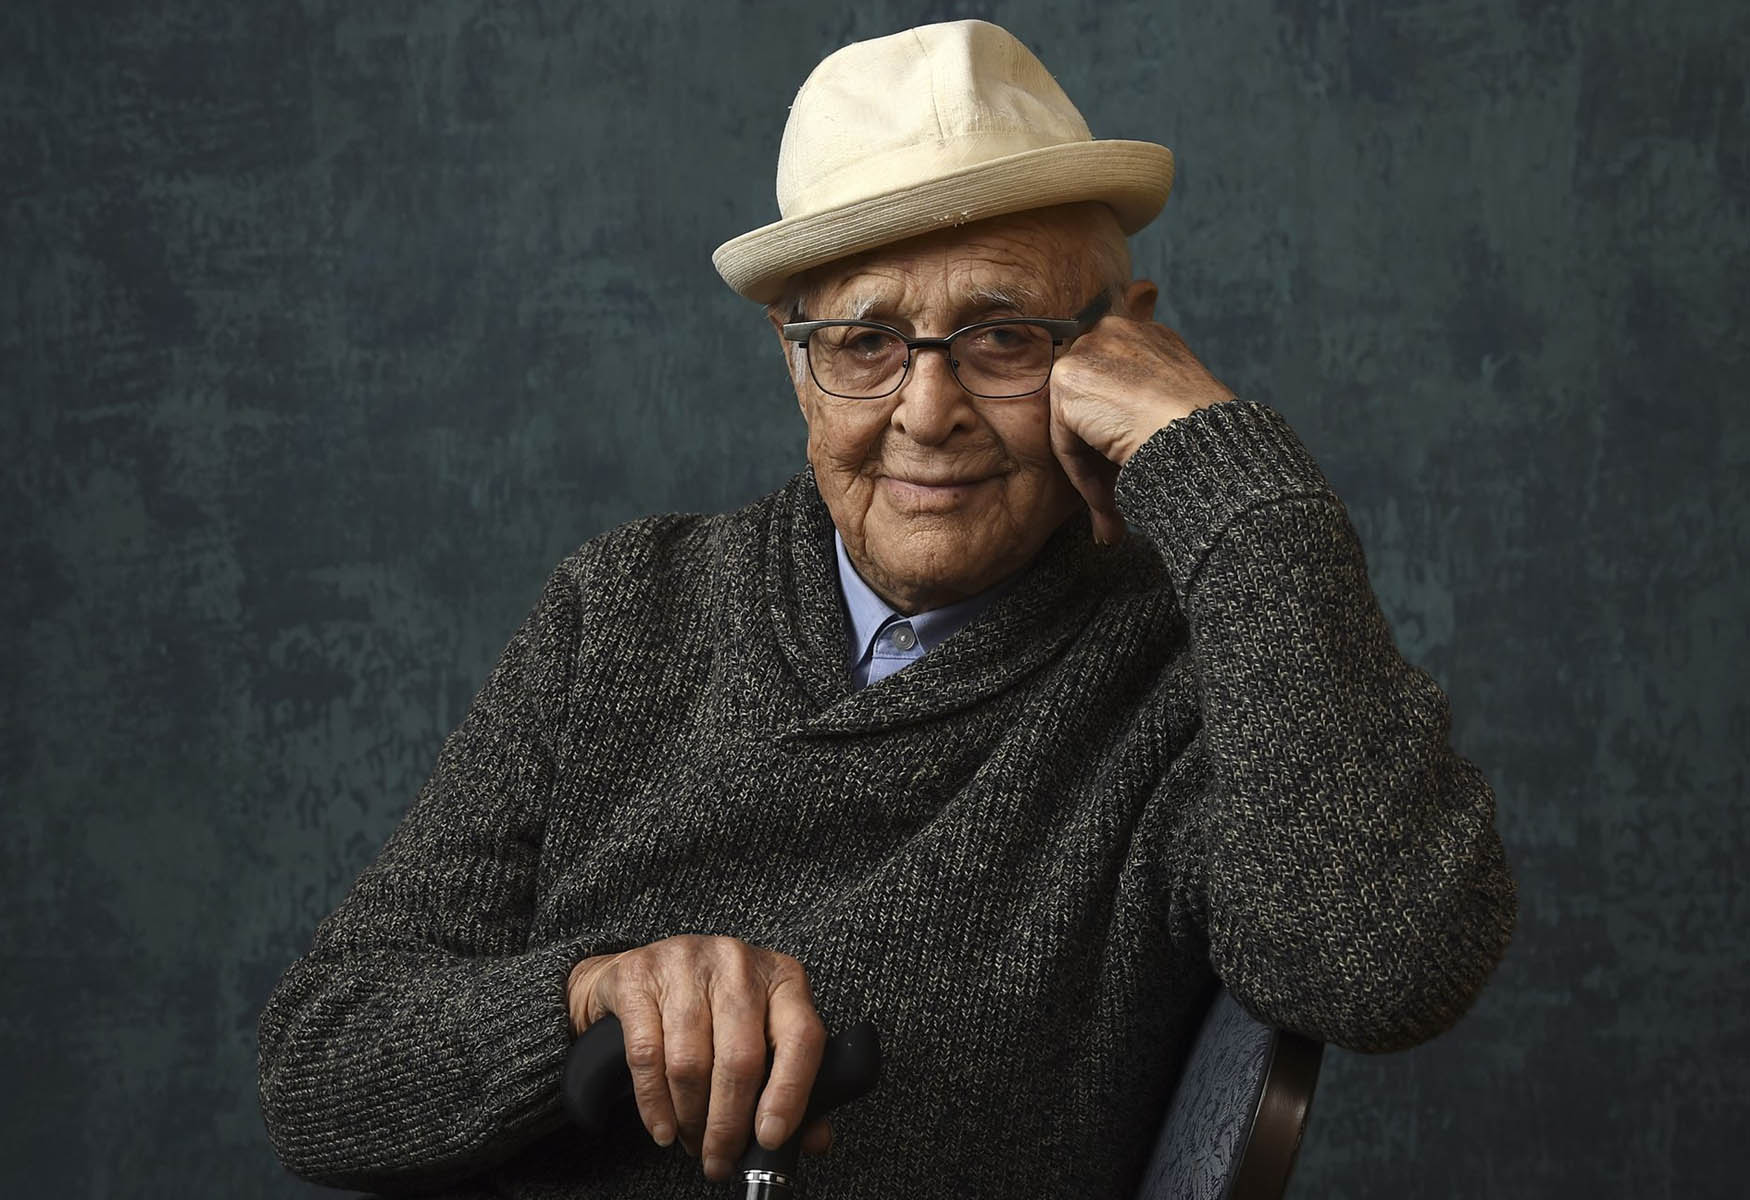 A Tribute To Norman Lear: Legendary TV Icon And Creator Of “All In The Family” Passes Away At 101